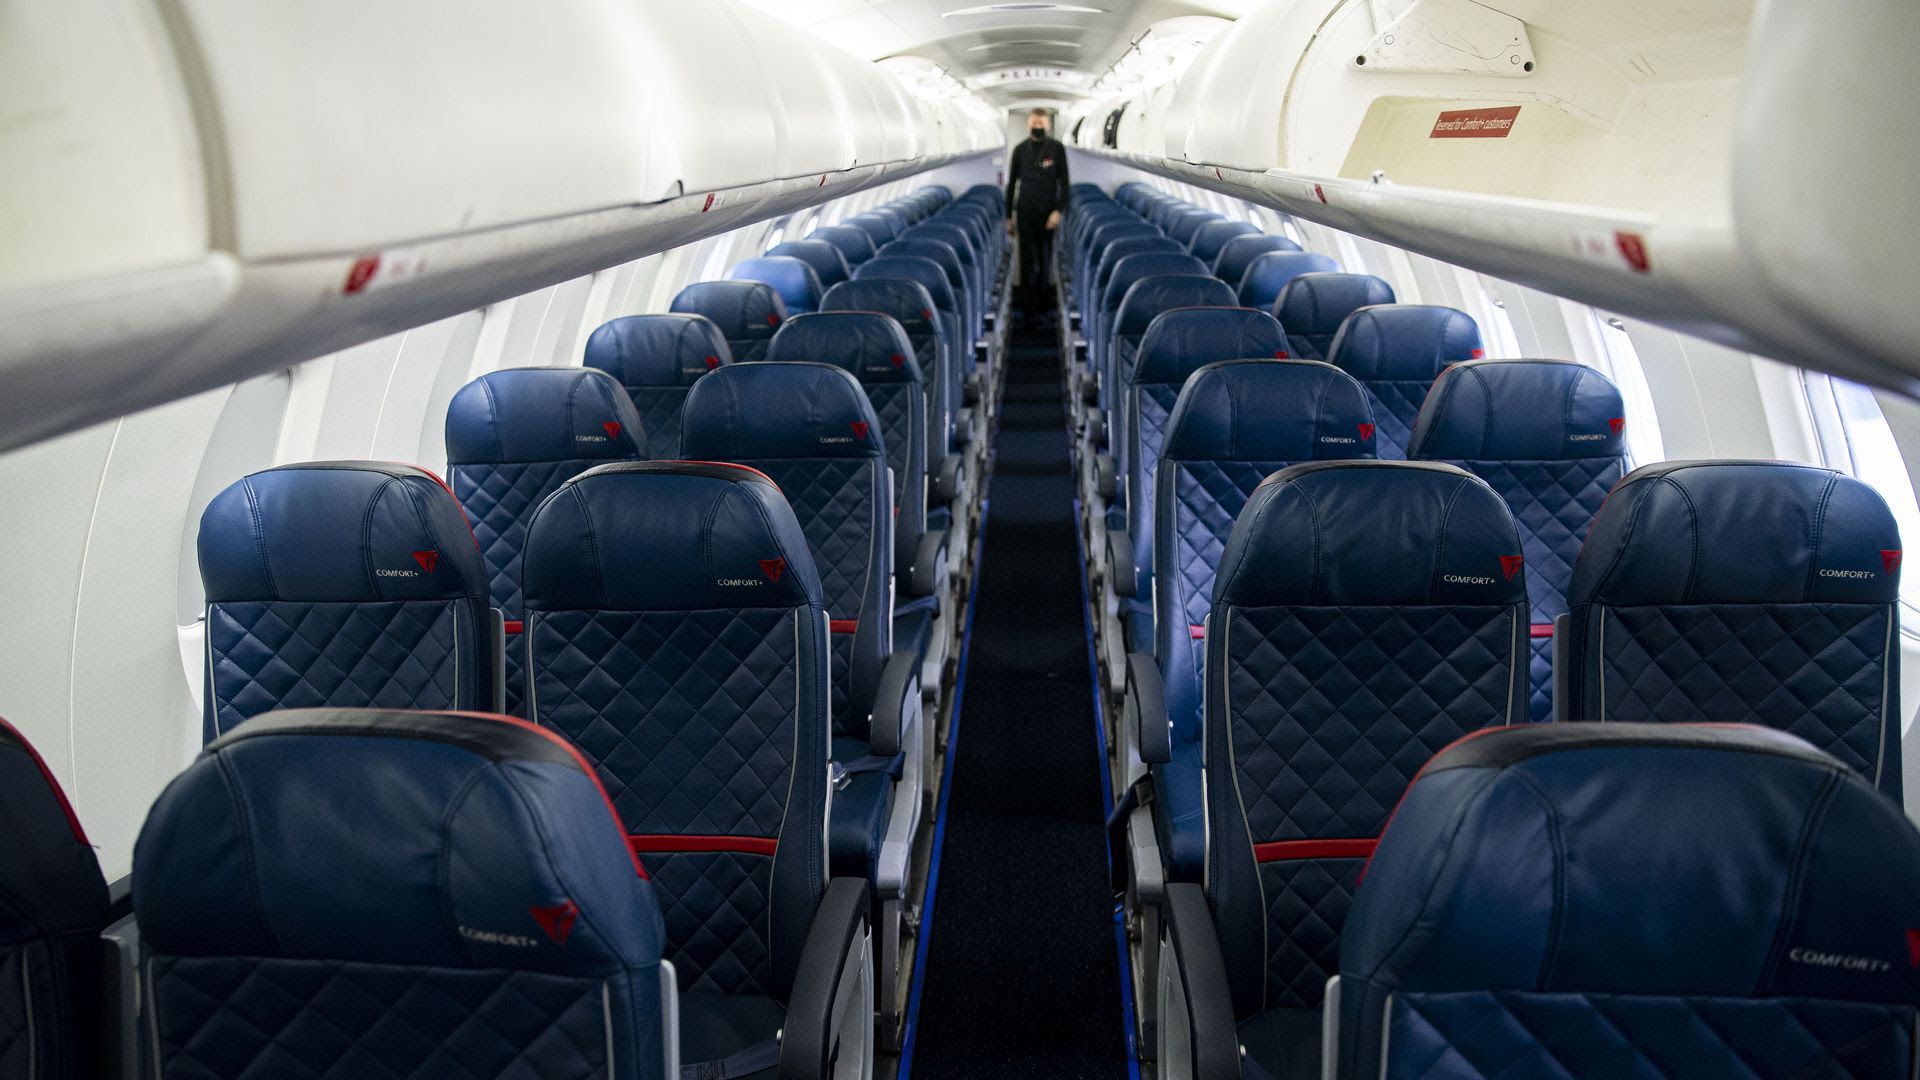 The interior of a Delta airplane, with blue quilted seats.